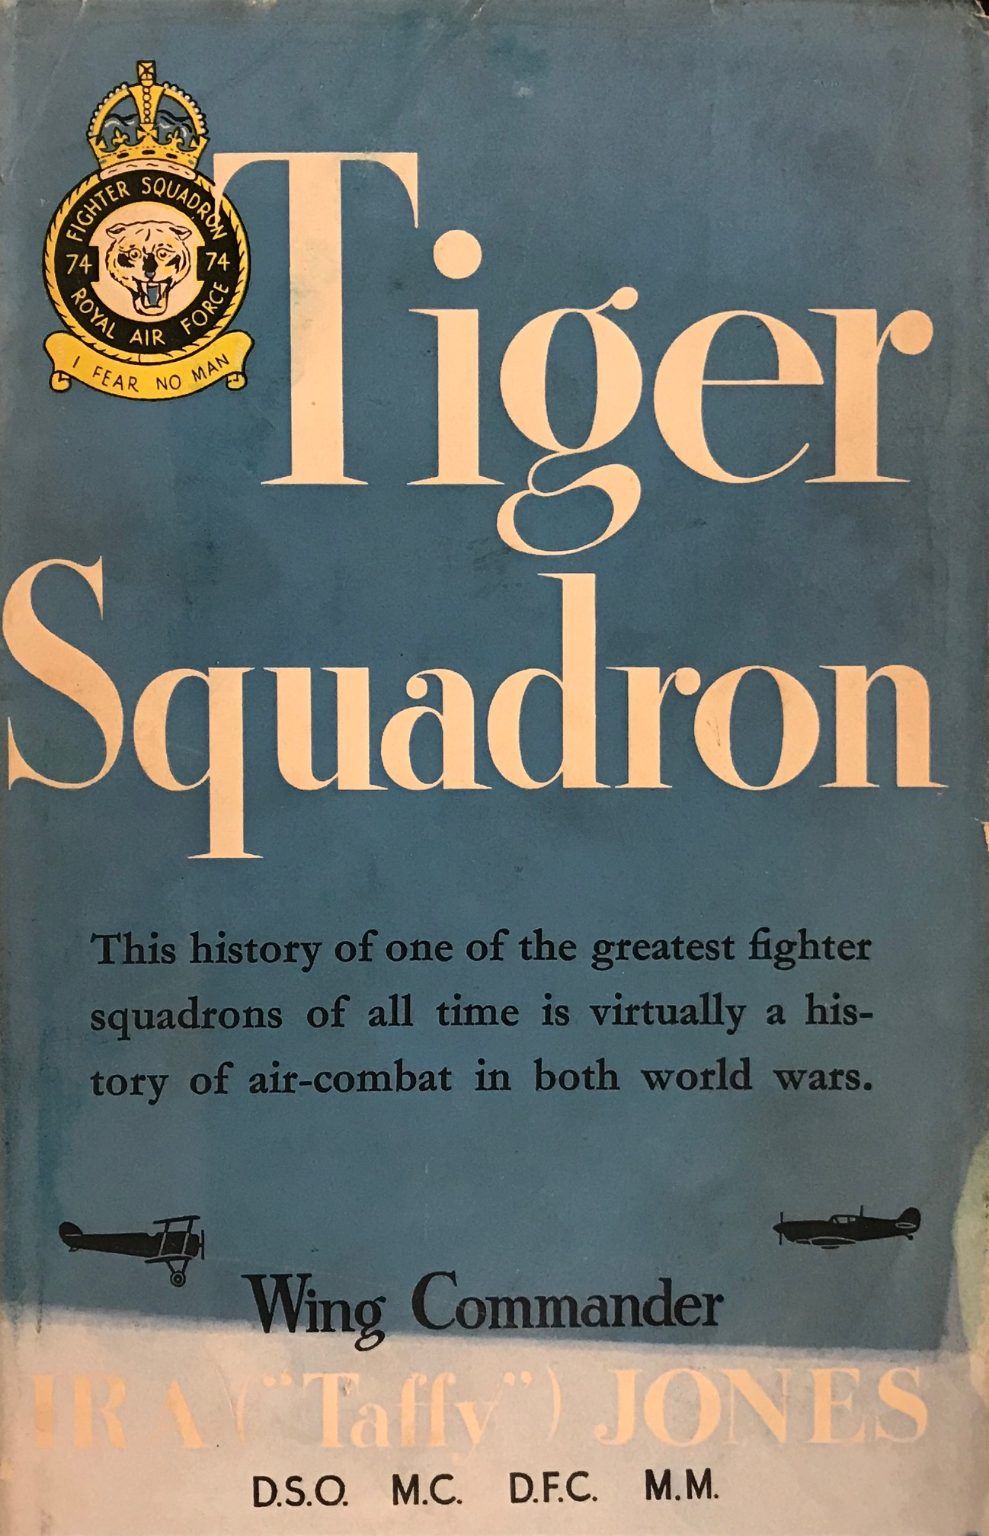 TIGER SQUADRON: The History of one of the greatest Fighter Squadrons